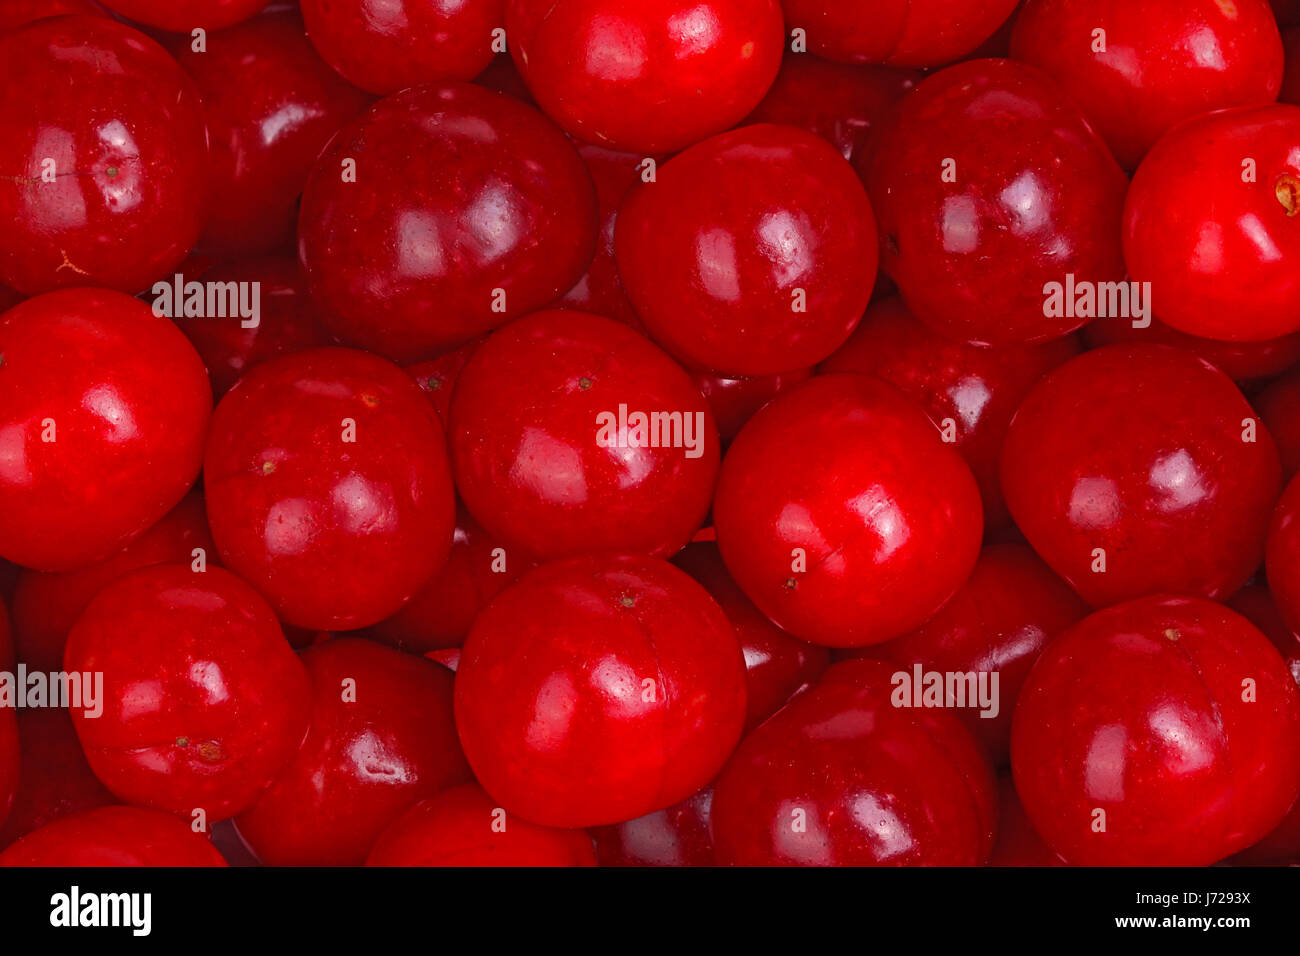 Numerous ripe, red fruit of sour cherries (Prunus cerasus) fill the frame Stock Photo